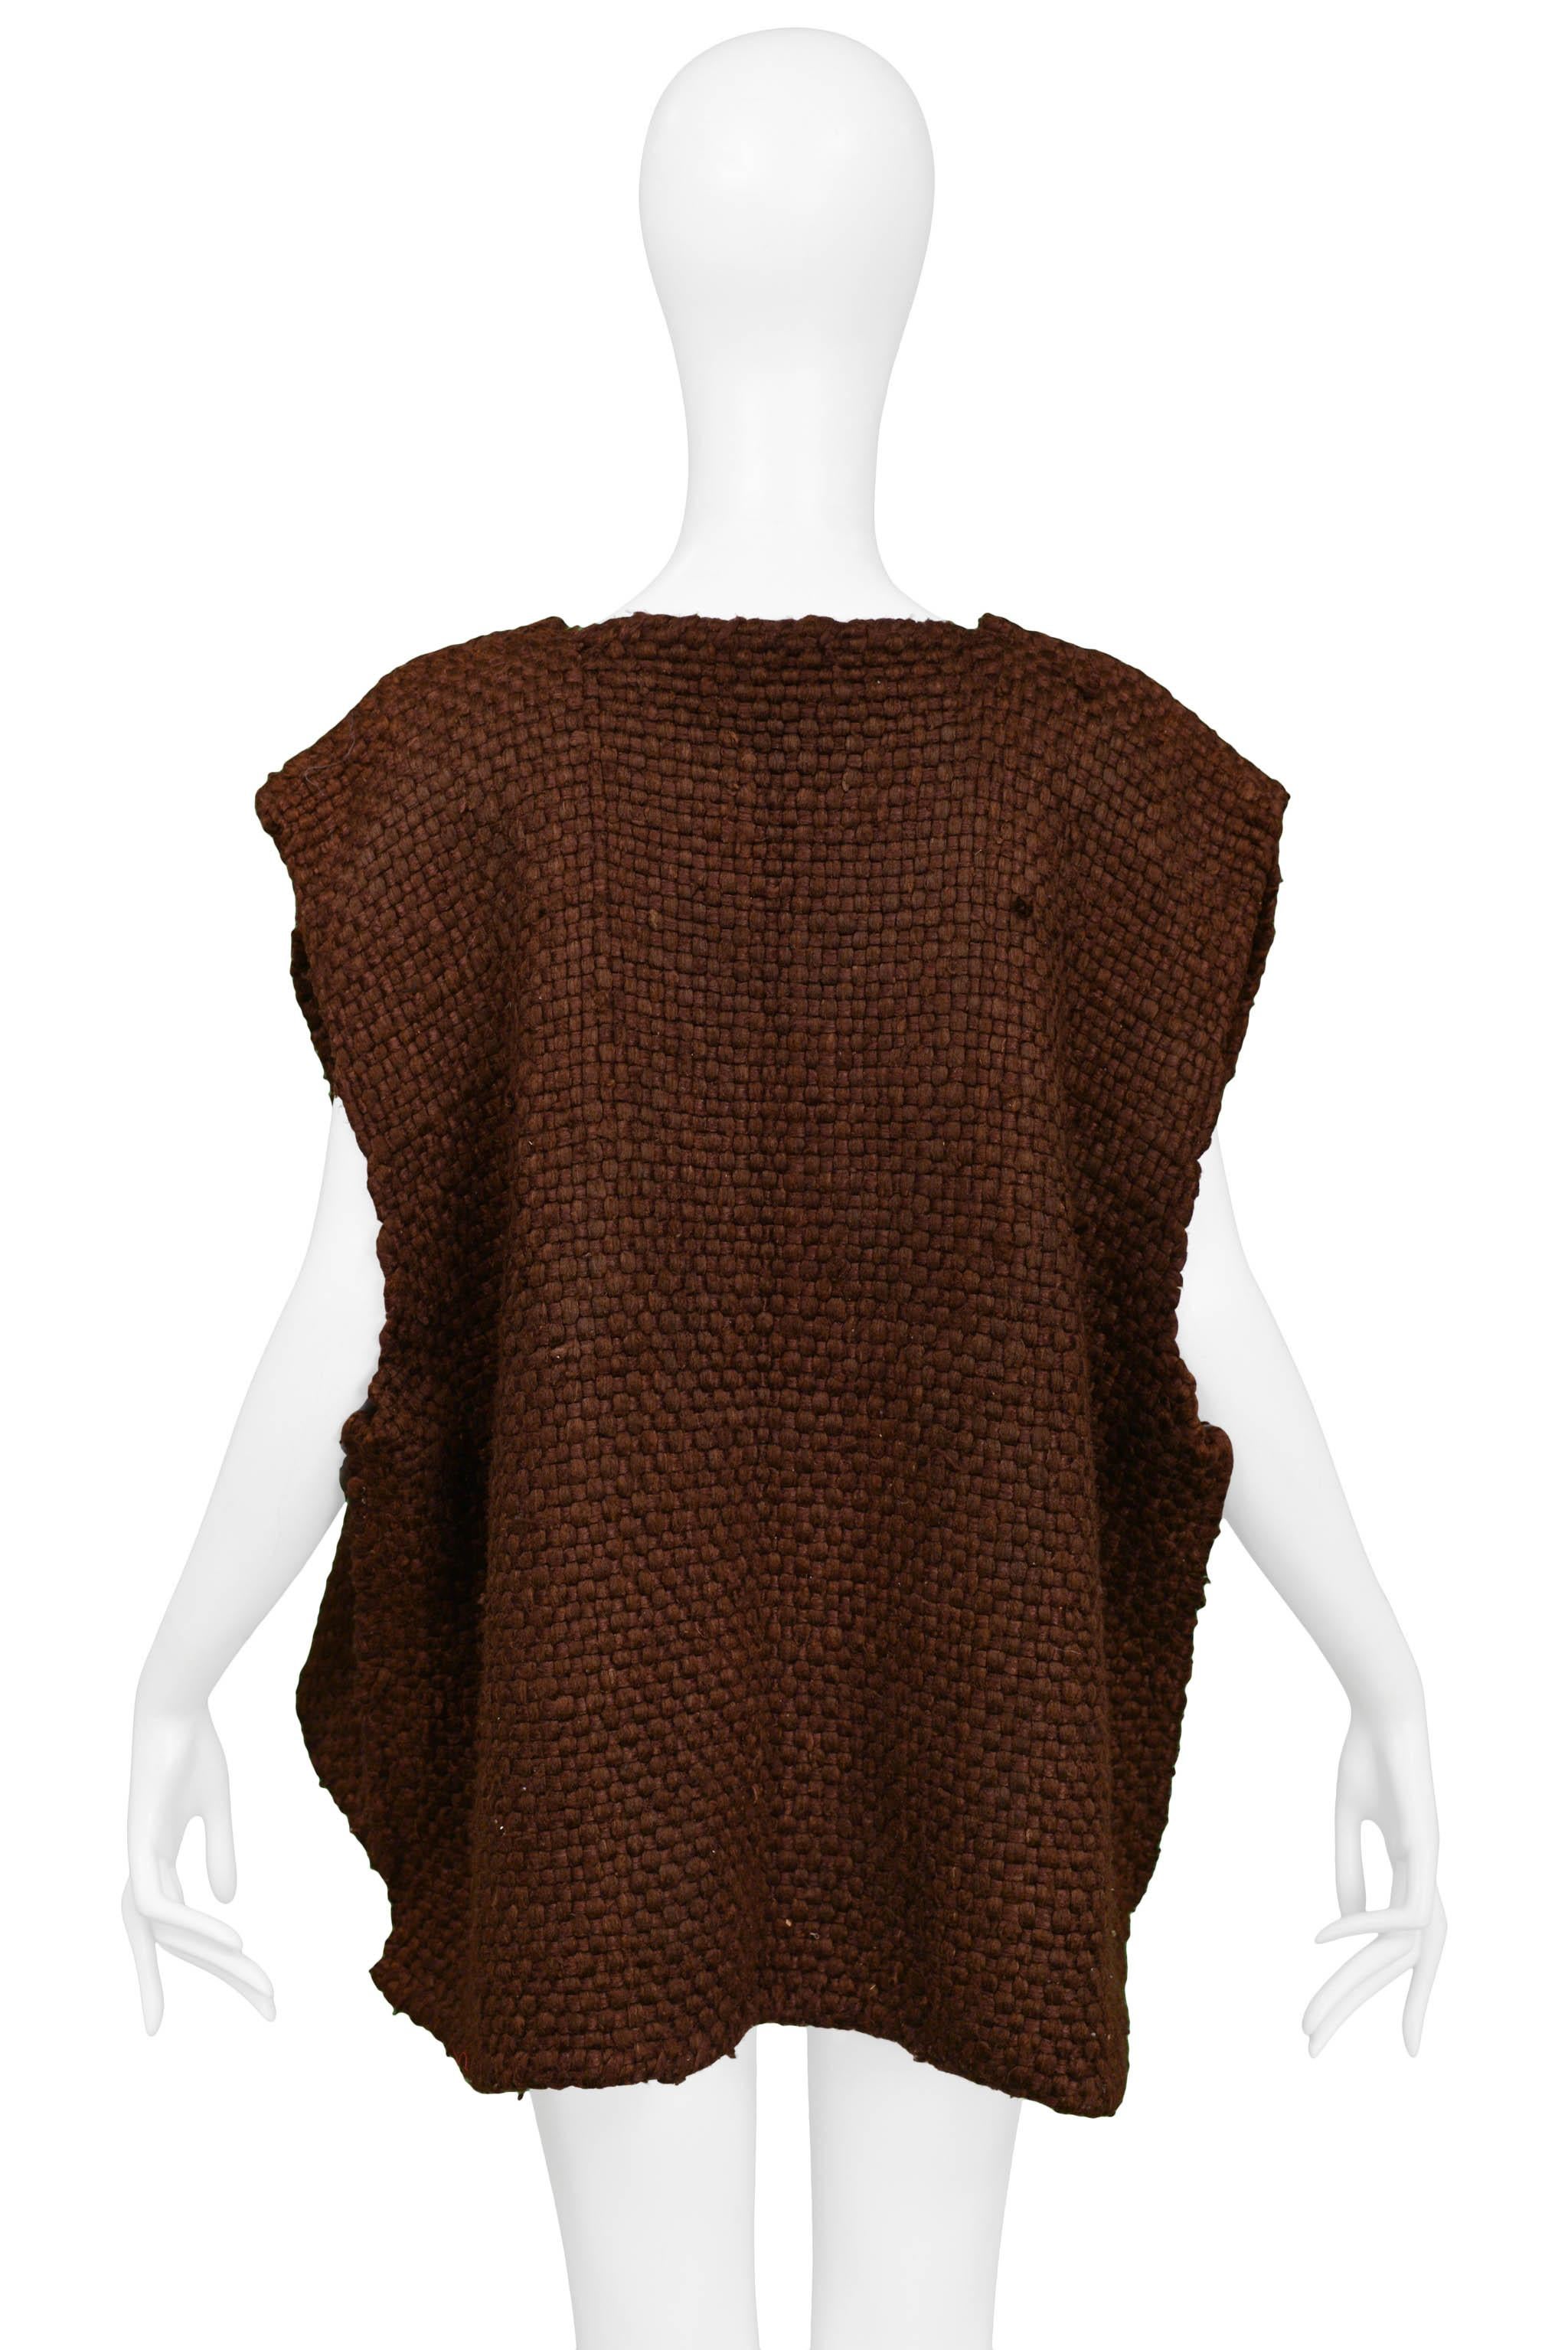 Resurrection Vintage is excited to offer a vintage Issey Miyake oversized brown woven knit vest with draping front panels. 

Issey Miyake
Size: One Size 
Knit
Excellent Vintage Condition
Authenticity Guaranteed